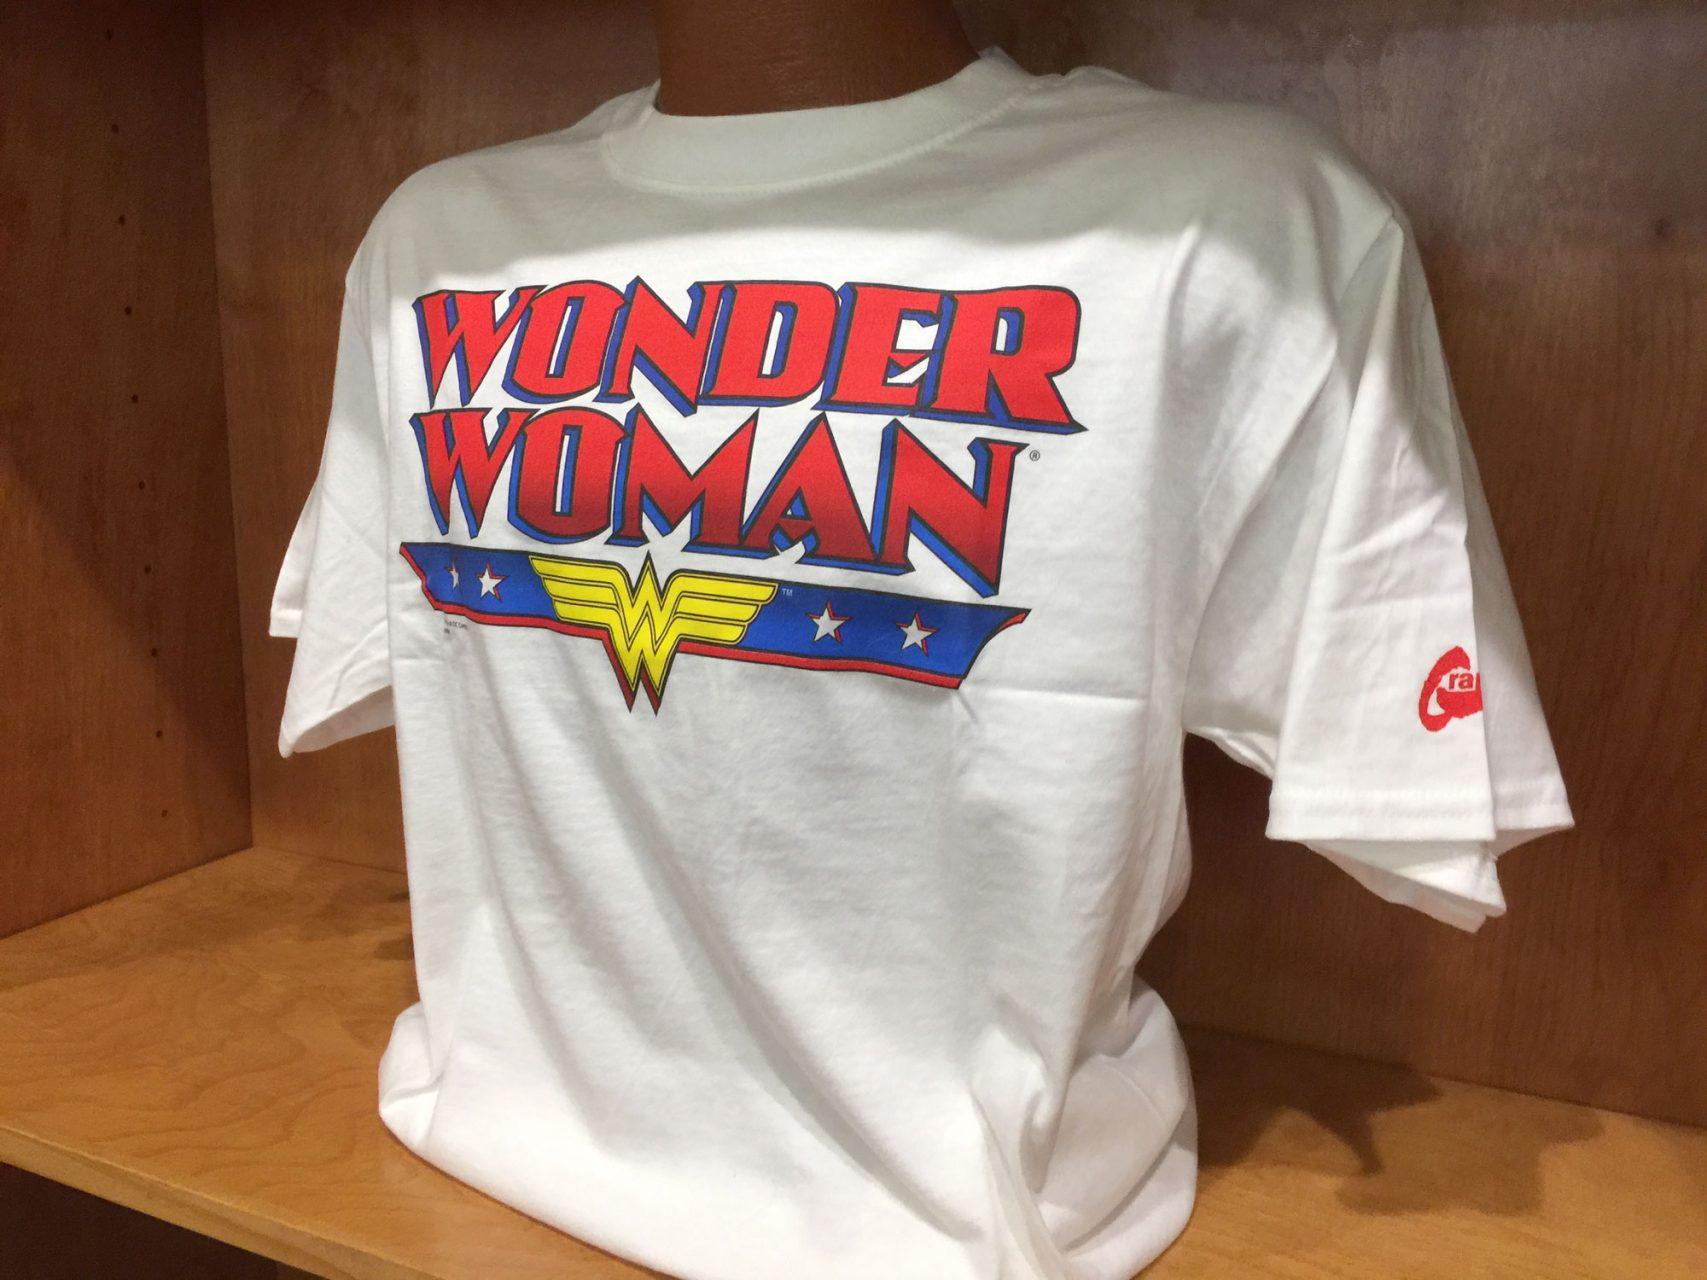 A+Wonder+Woman+t-shirt+on+display+in+the+book+store.+Appalachian+States+bookstore+has+a+collection+of+superhero+items+for+sale.+++